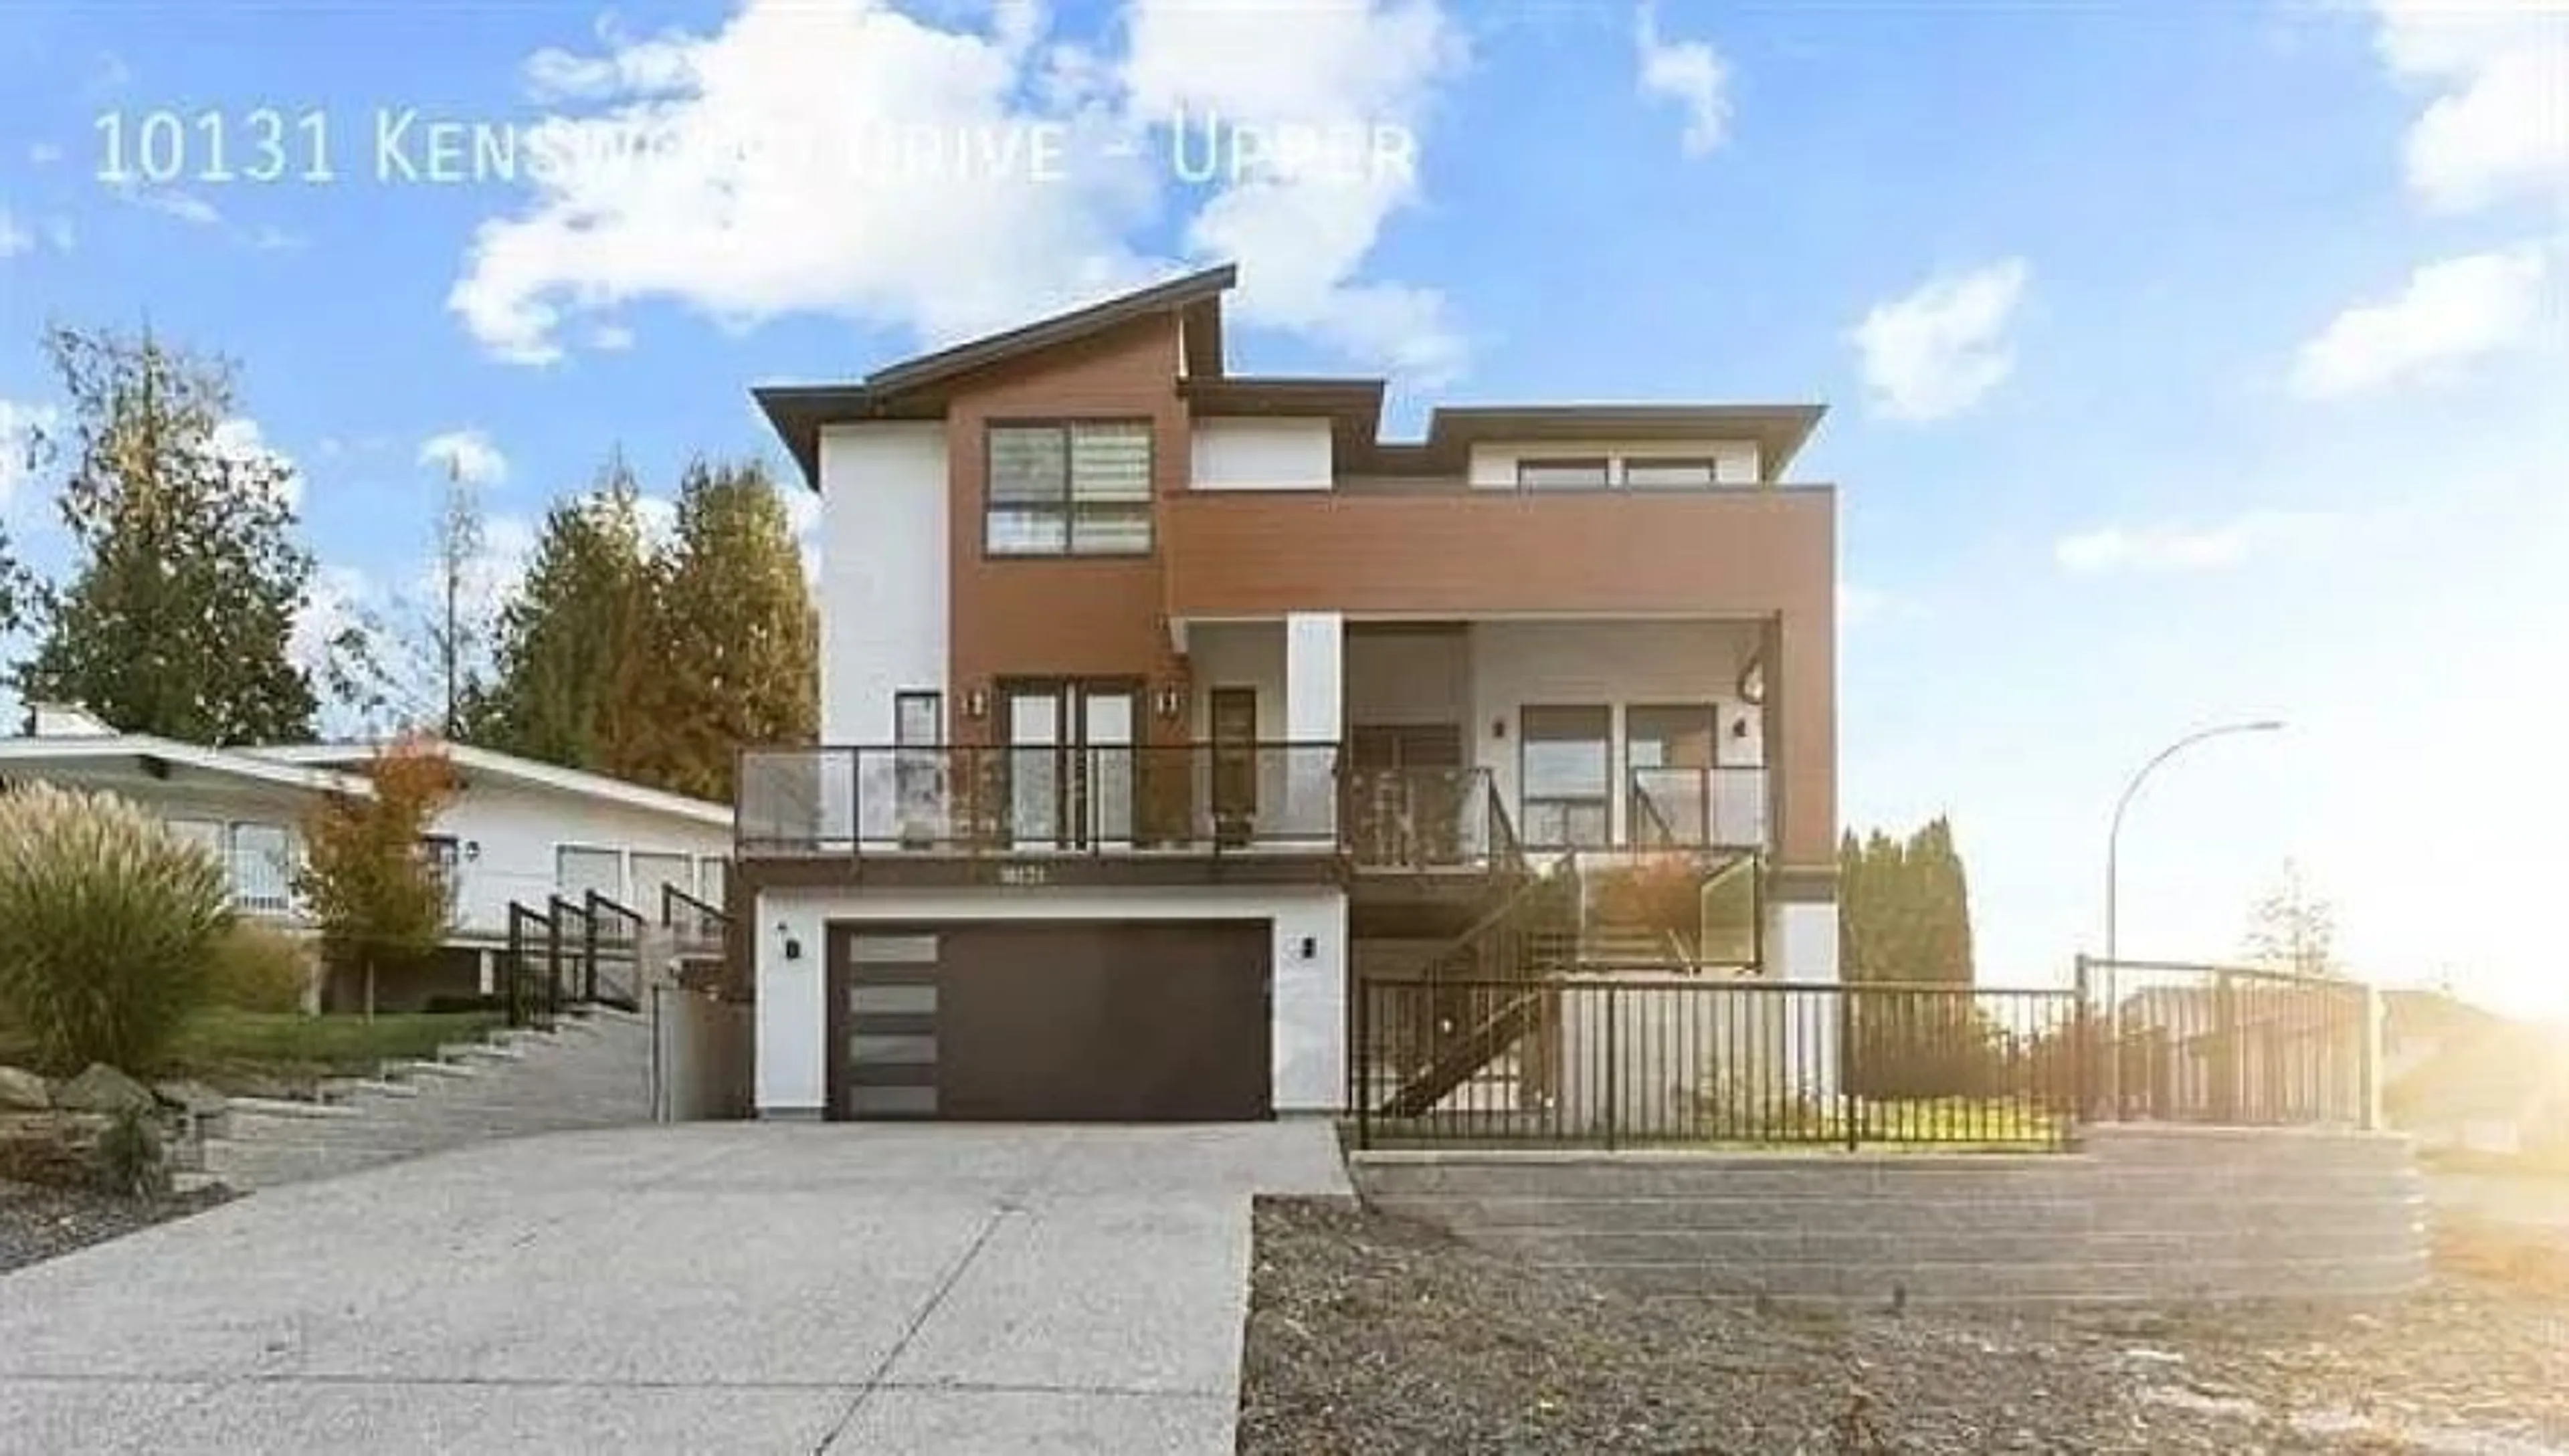 Frontside or backside of a home for 10131 KENSWOOD DRIVE, Chilliwack British Columbia V2P7N6